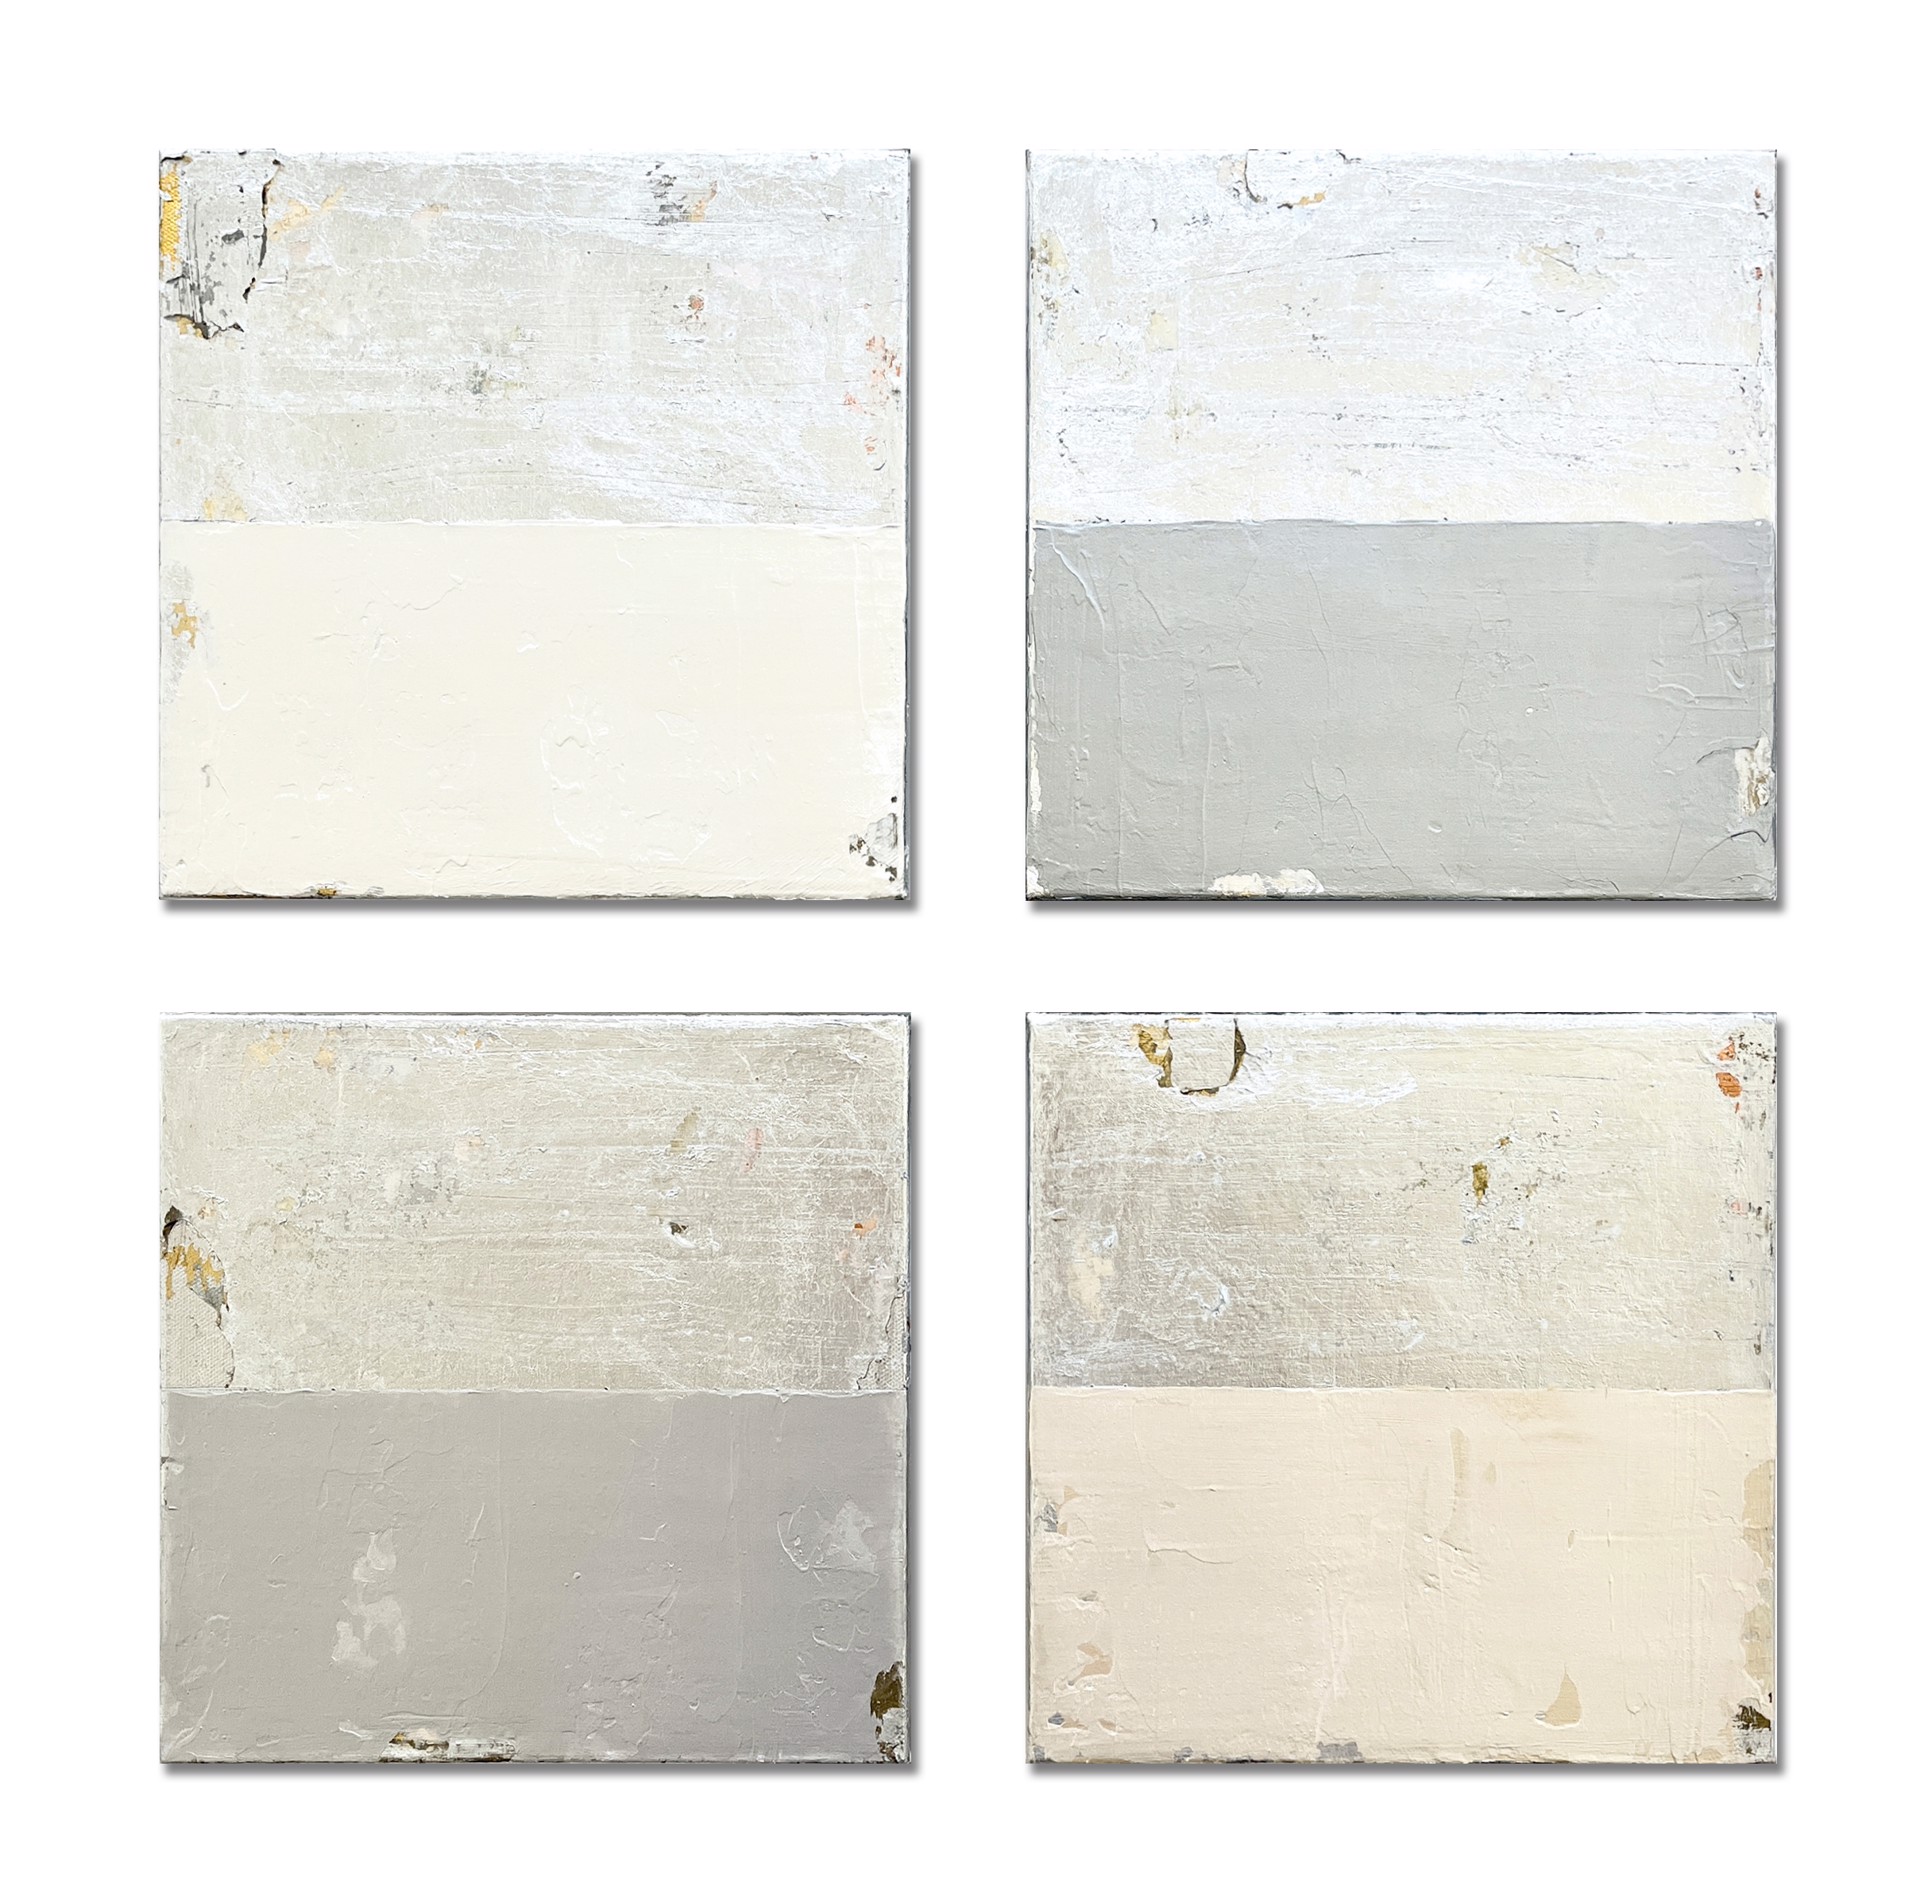 Silver And Silver (SS050 SS051 SS052 SS053) is a set of 4 multiple silver leaf mixed media panels from Japanese painter and artist Takefumi Hori.